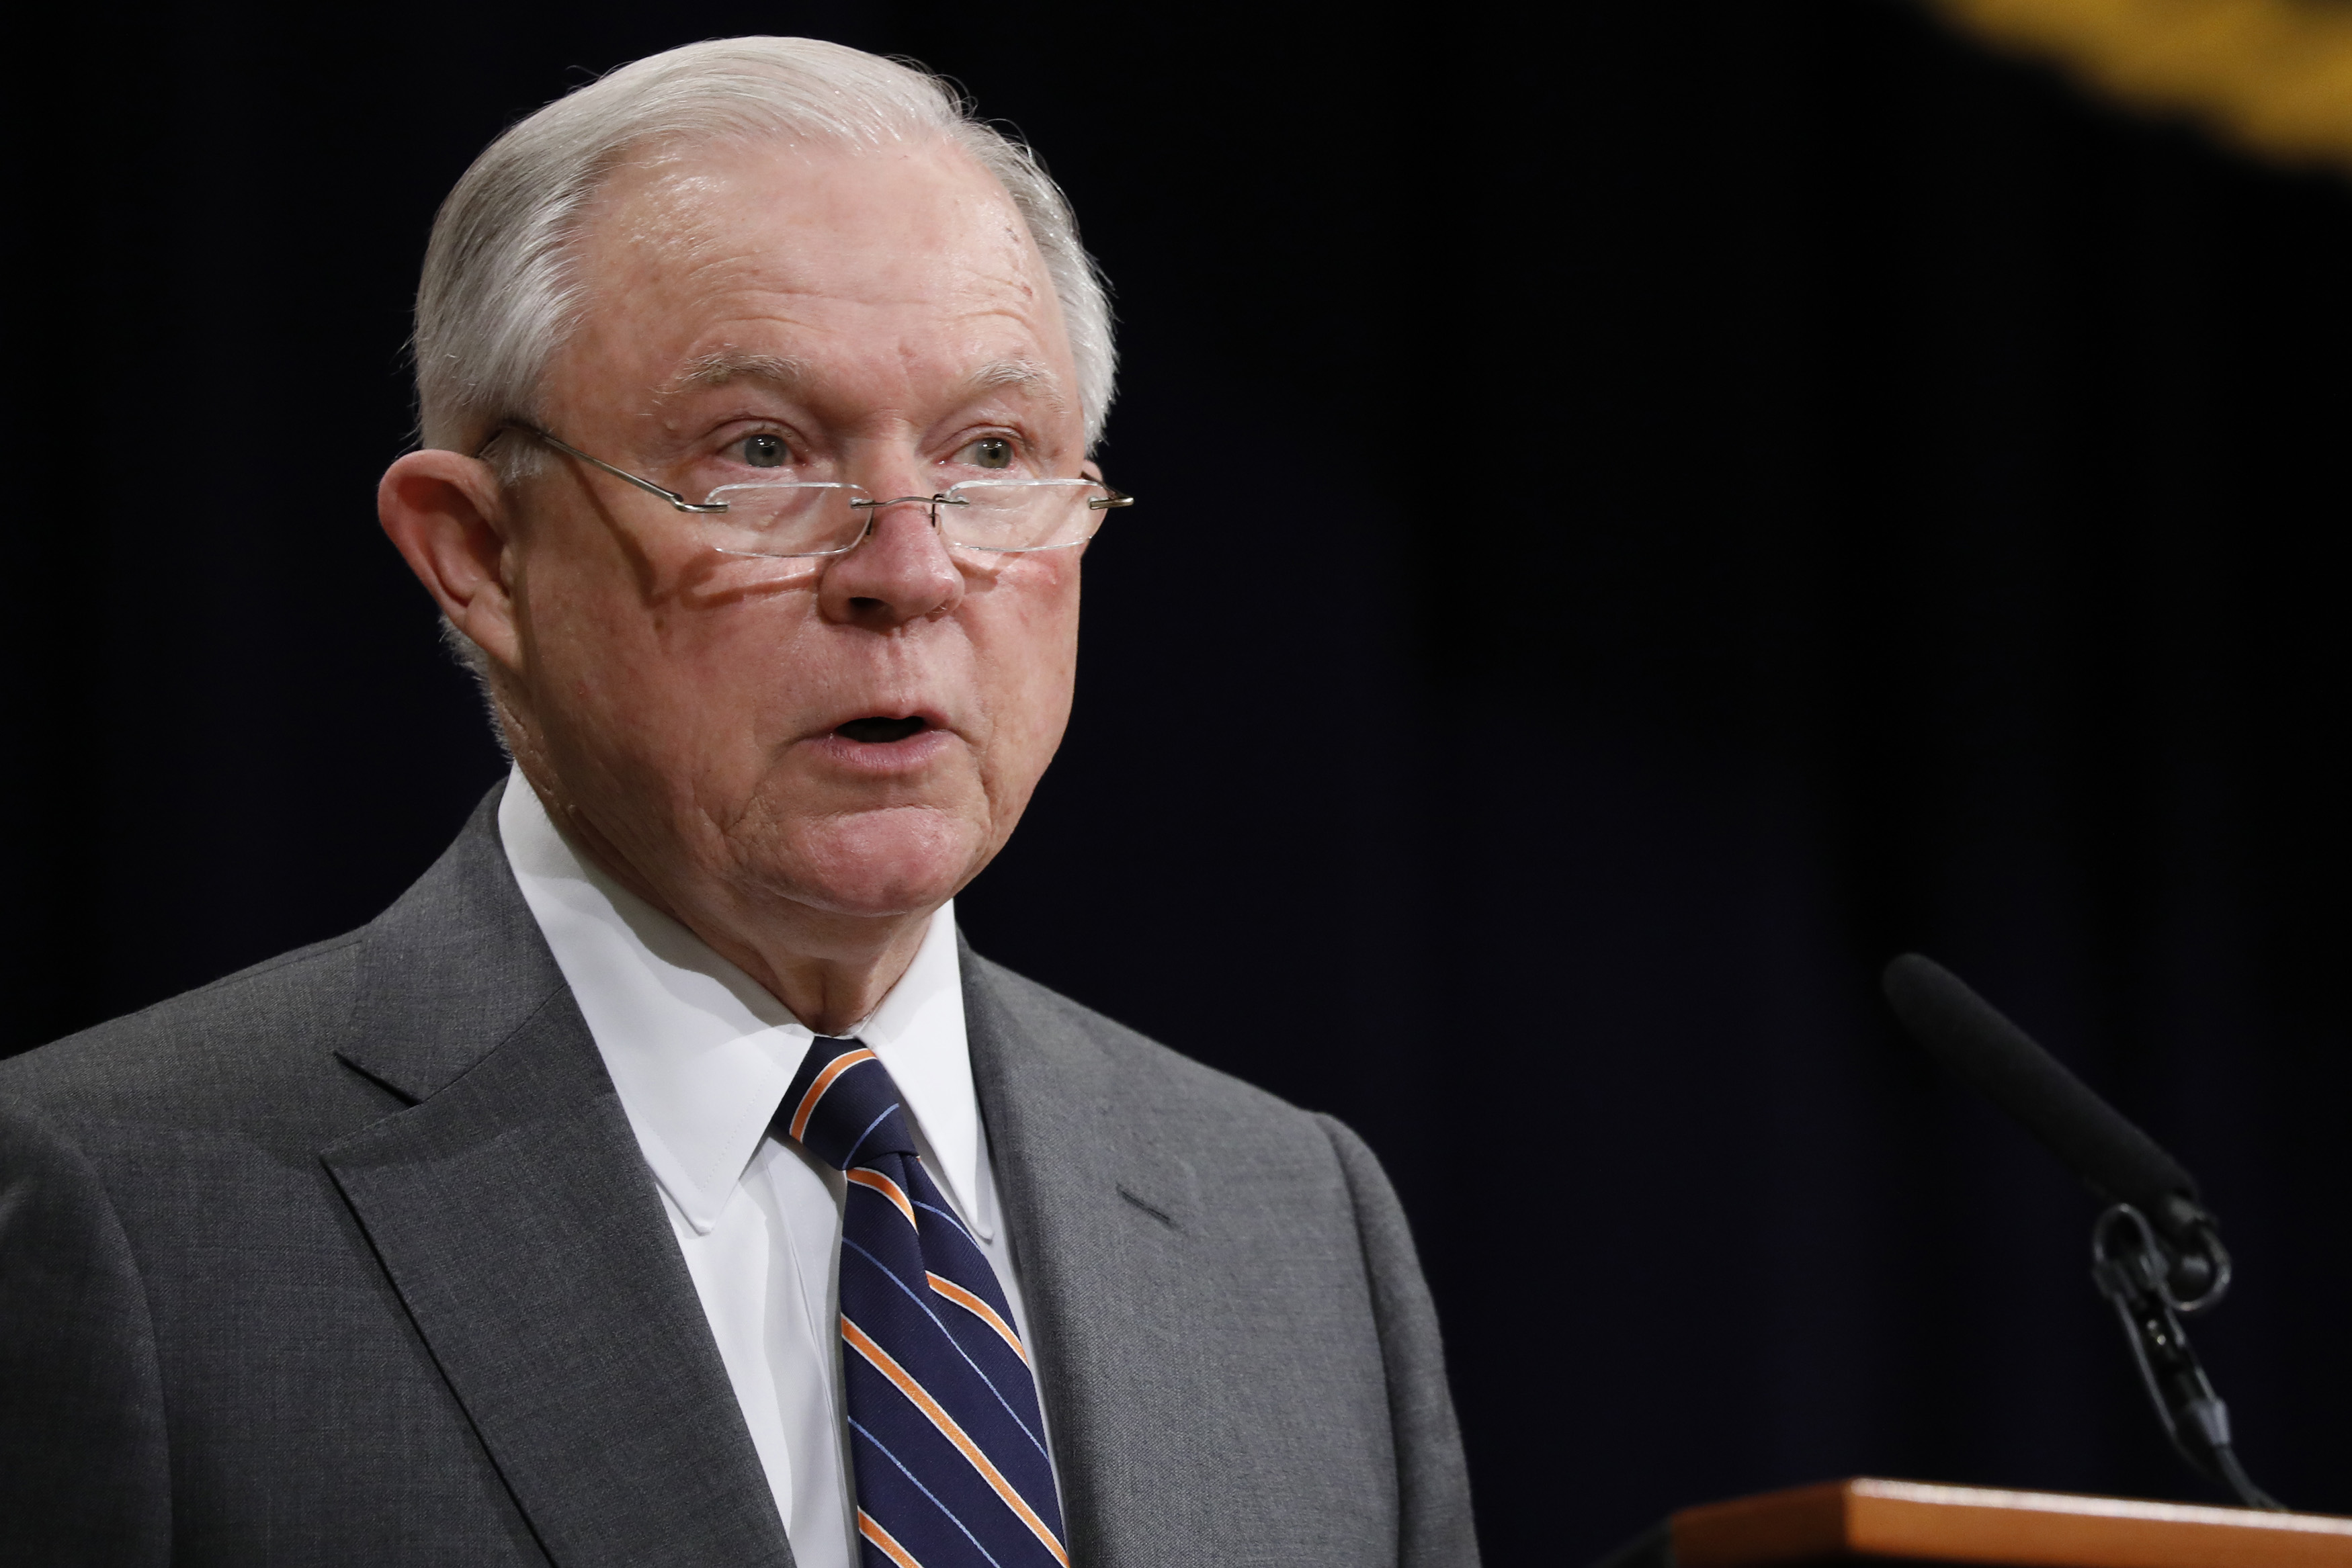 Attorney General Jeff Sessions speaks at the Justice Department in Washington, D.C. on Sept. 17, 2018. (Aaron P. Bernstein—Getty Images)